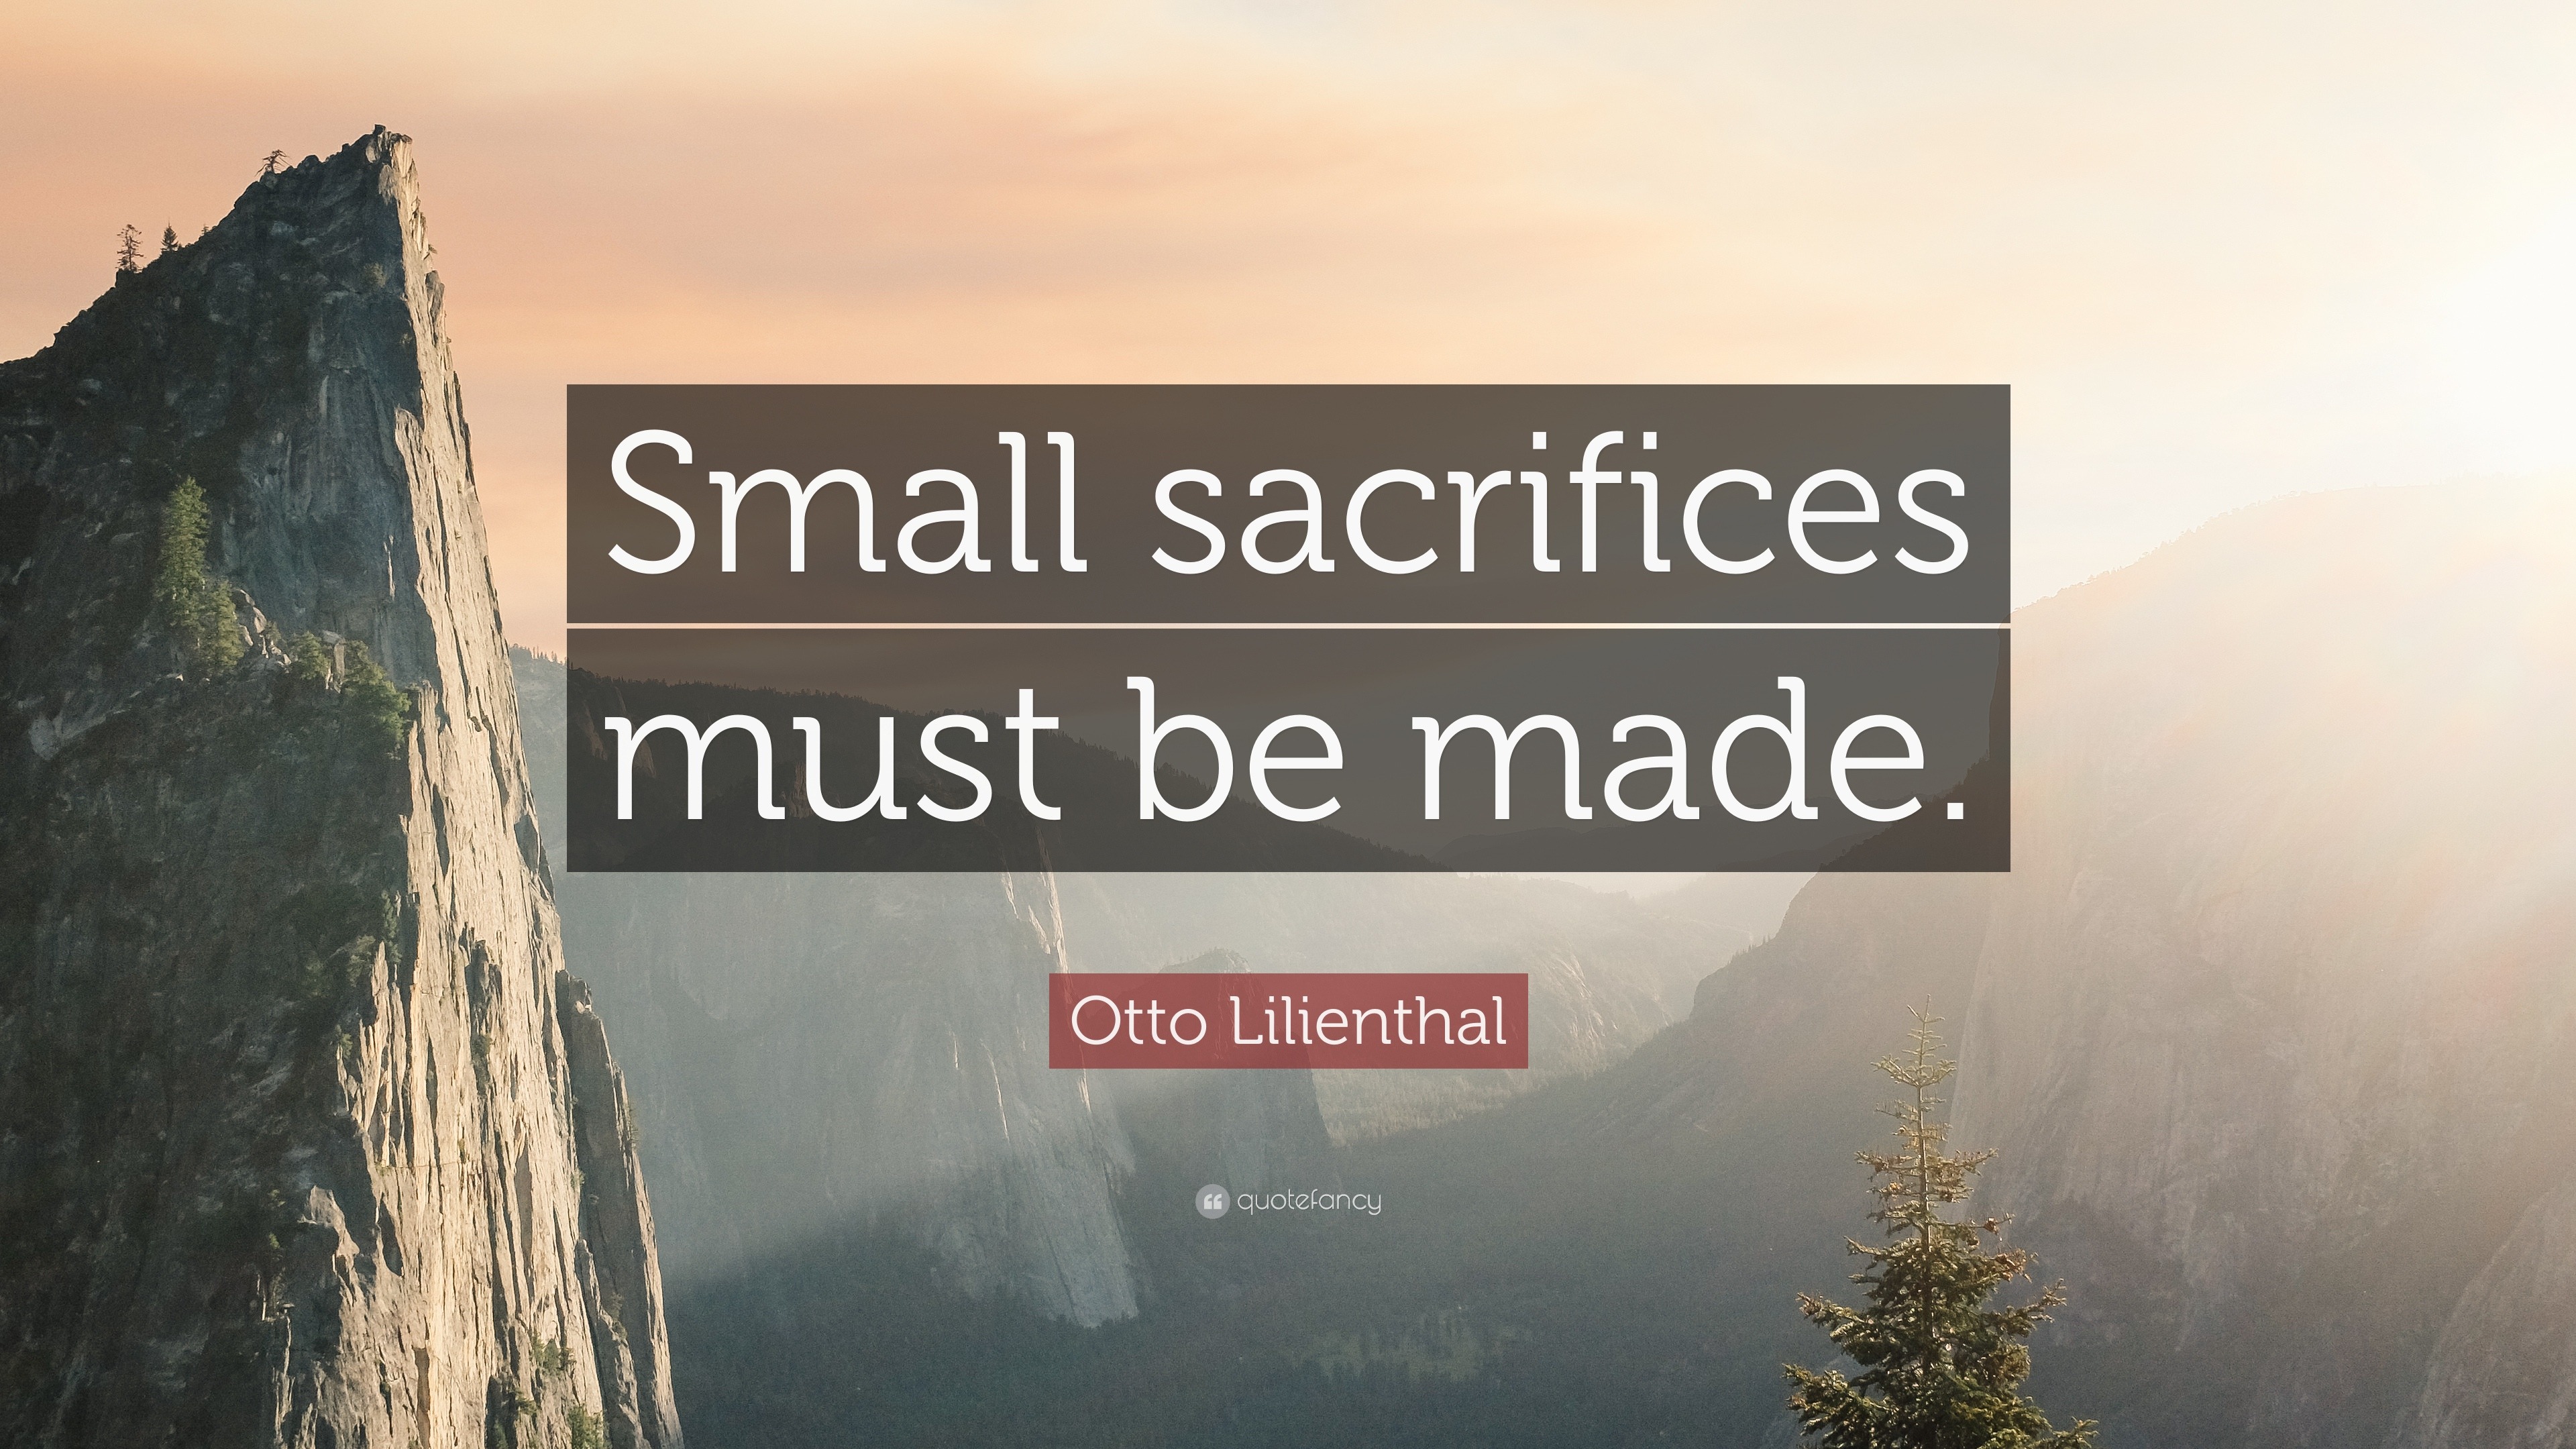 Otto Lilienthal quote: Small sacrifices must be made.